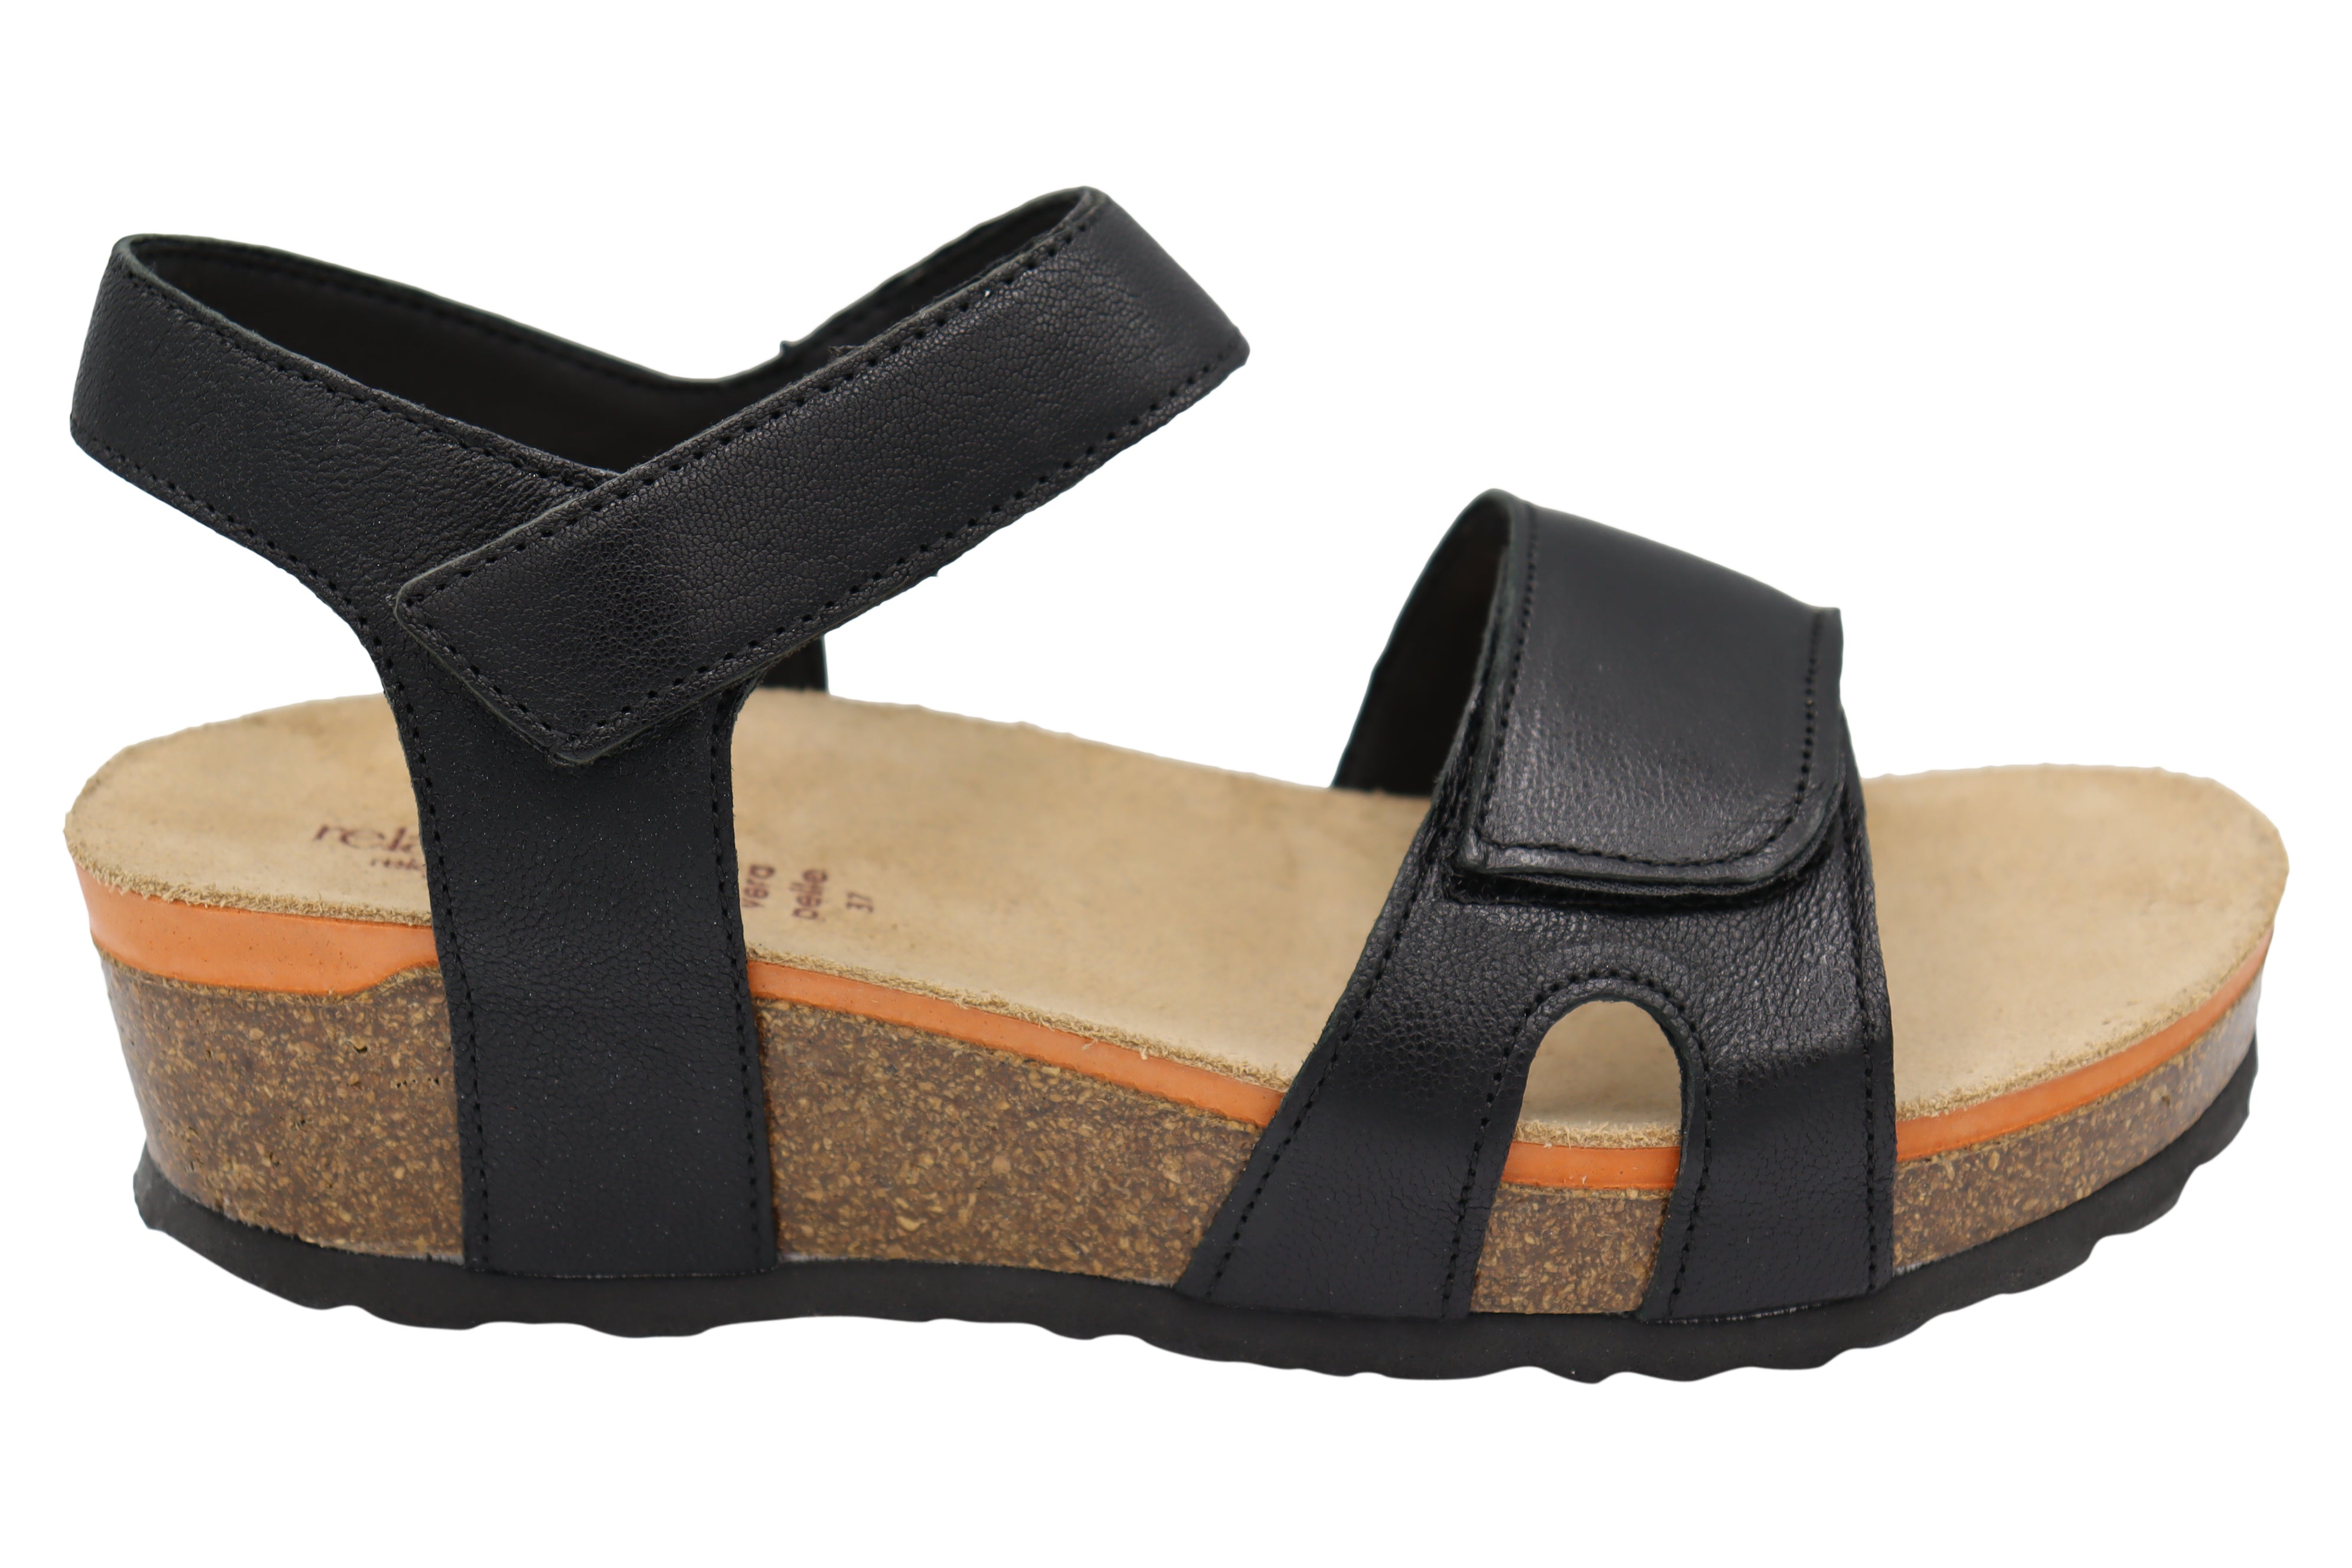 Asbury Black Leather Wedge by Relax Shoe